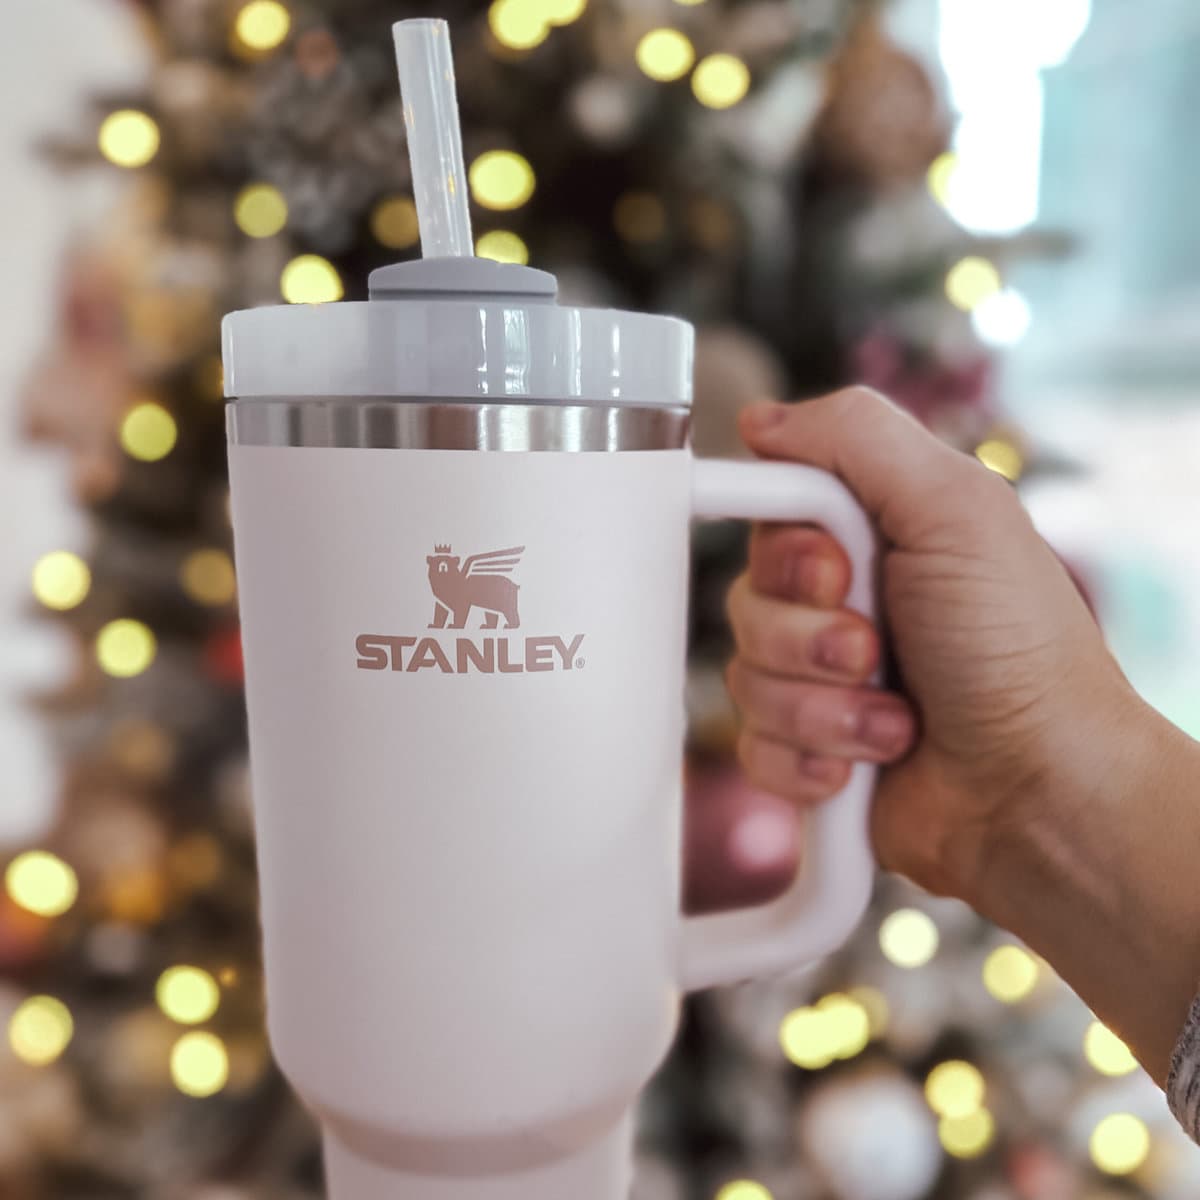 Stanley Discount Code: 15% off the Best Cup of All Time! - A Slice of Style